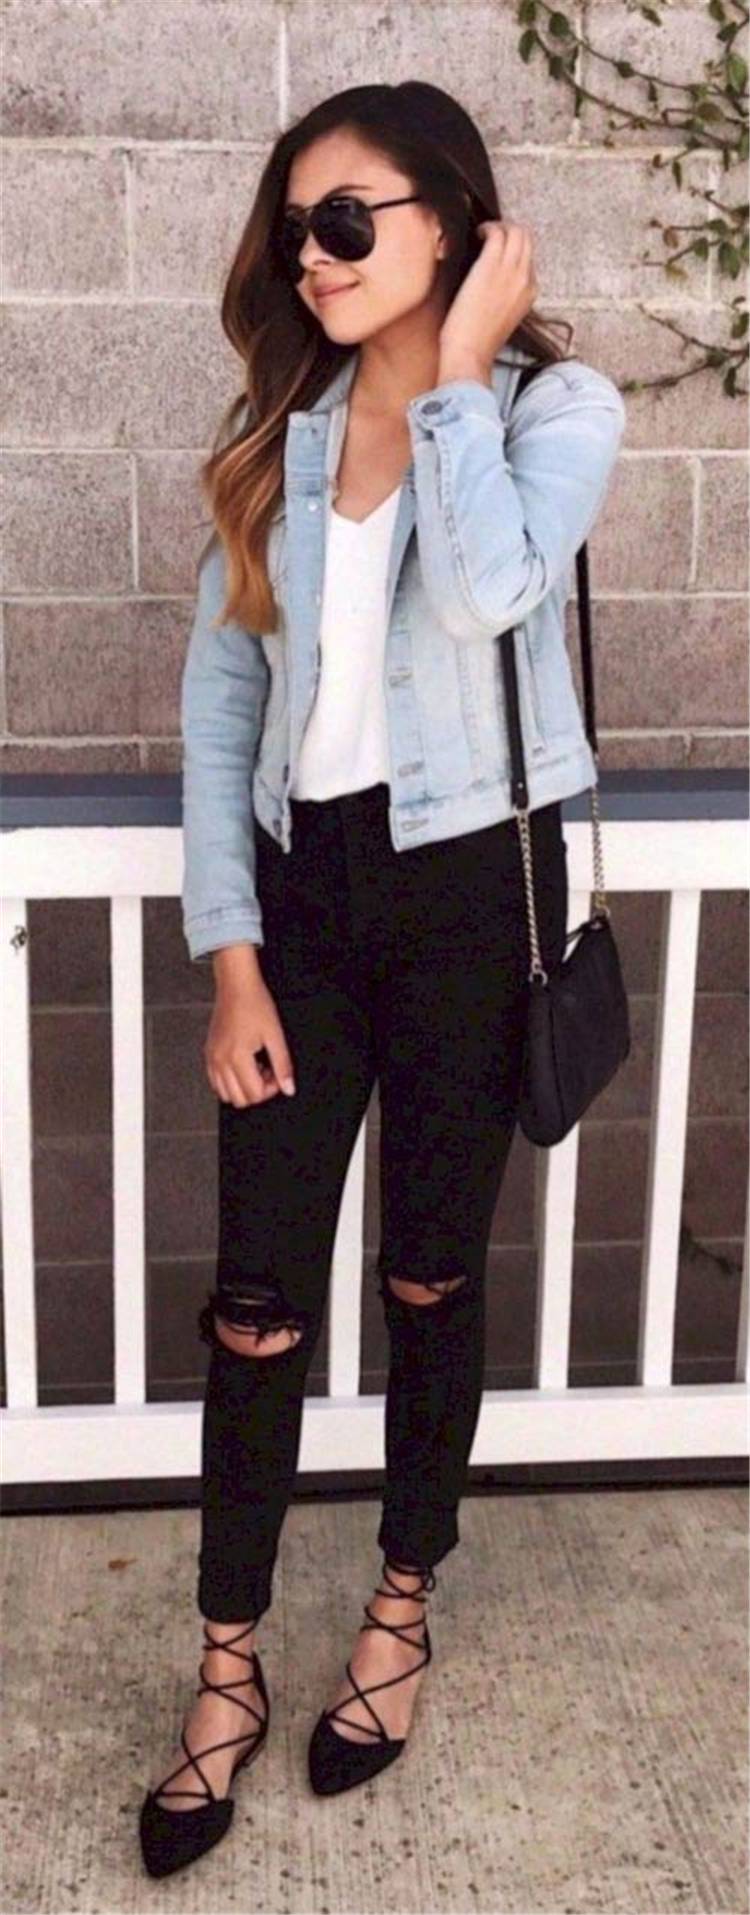 stylish outfits for teenage girl